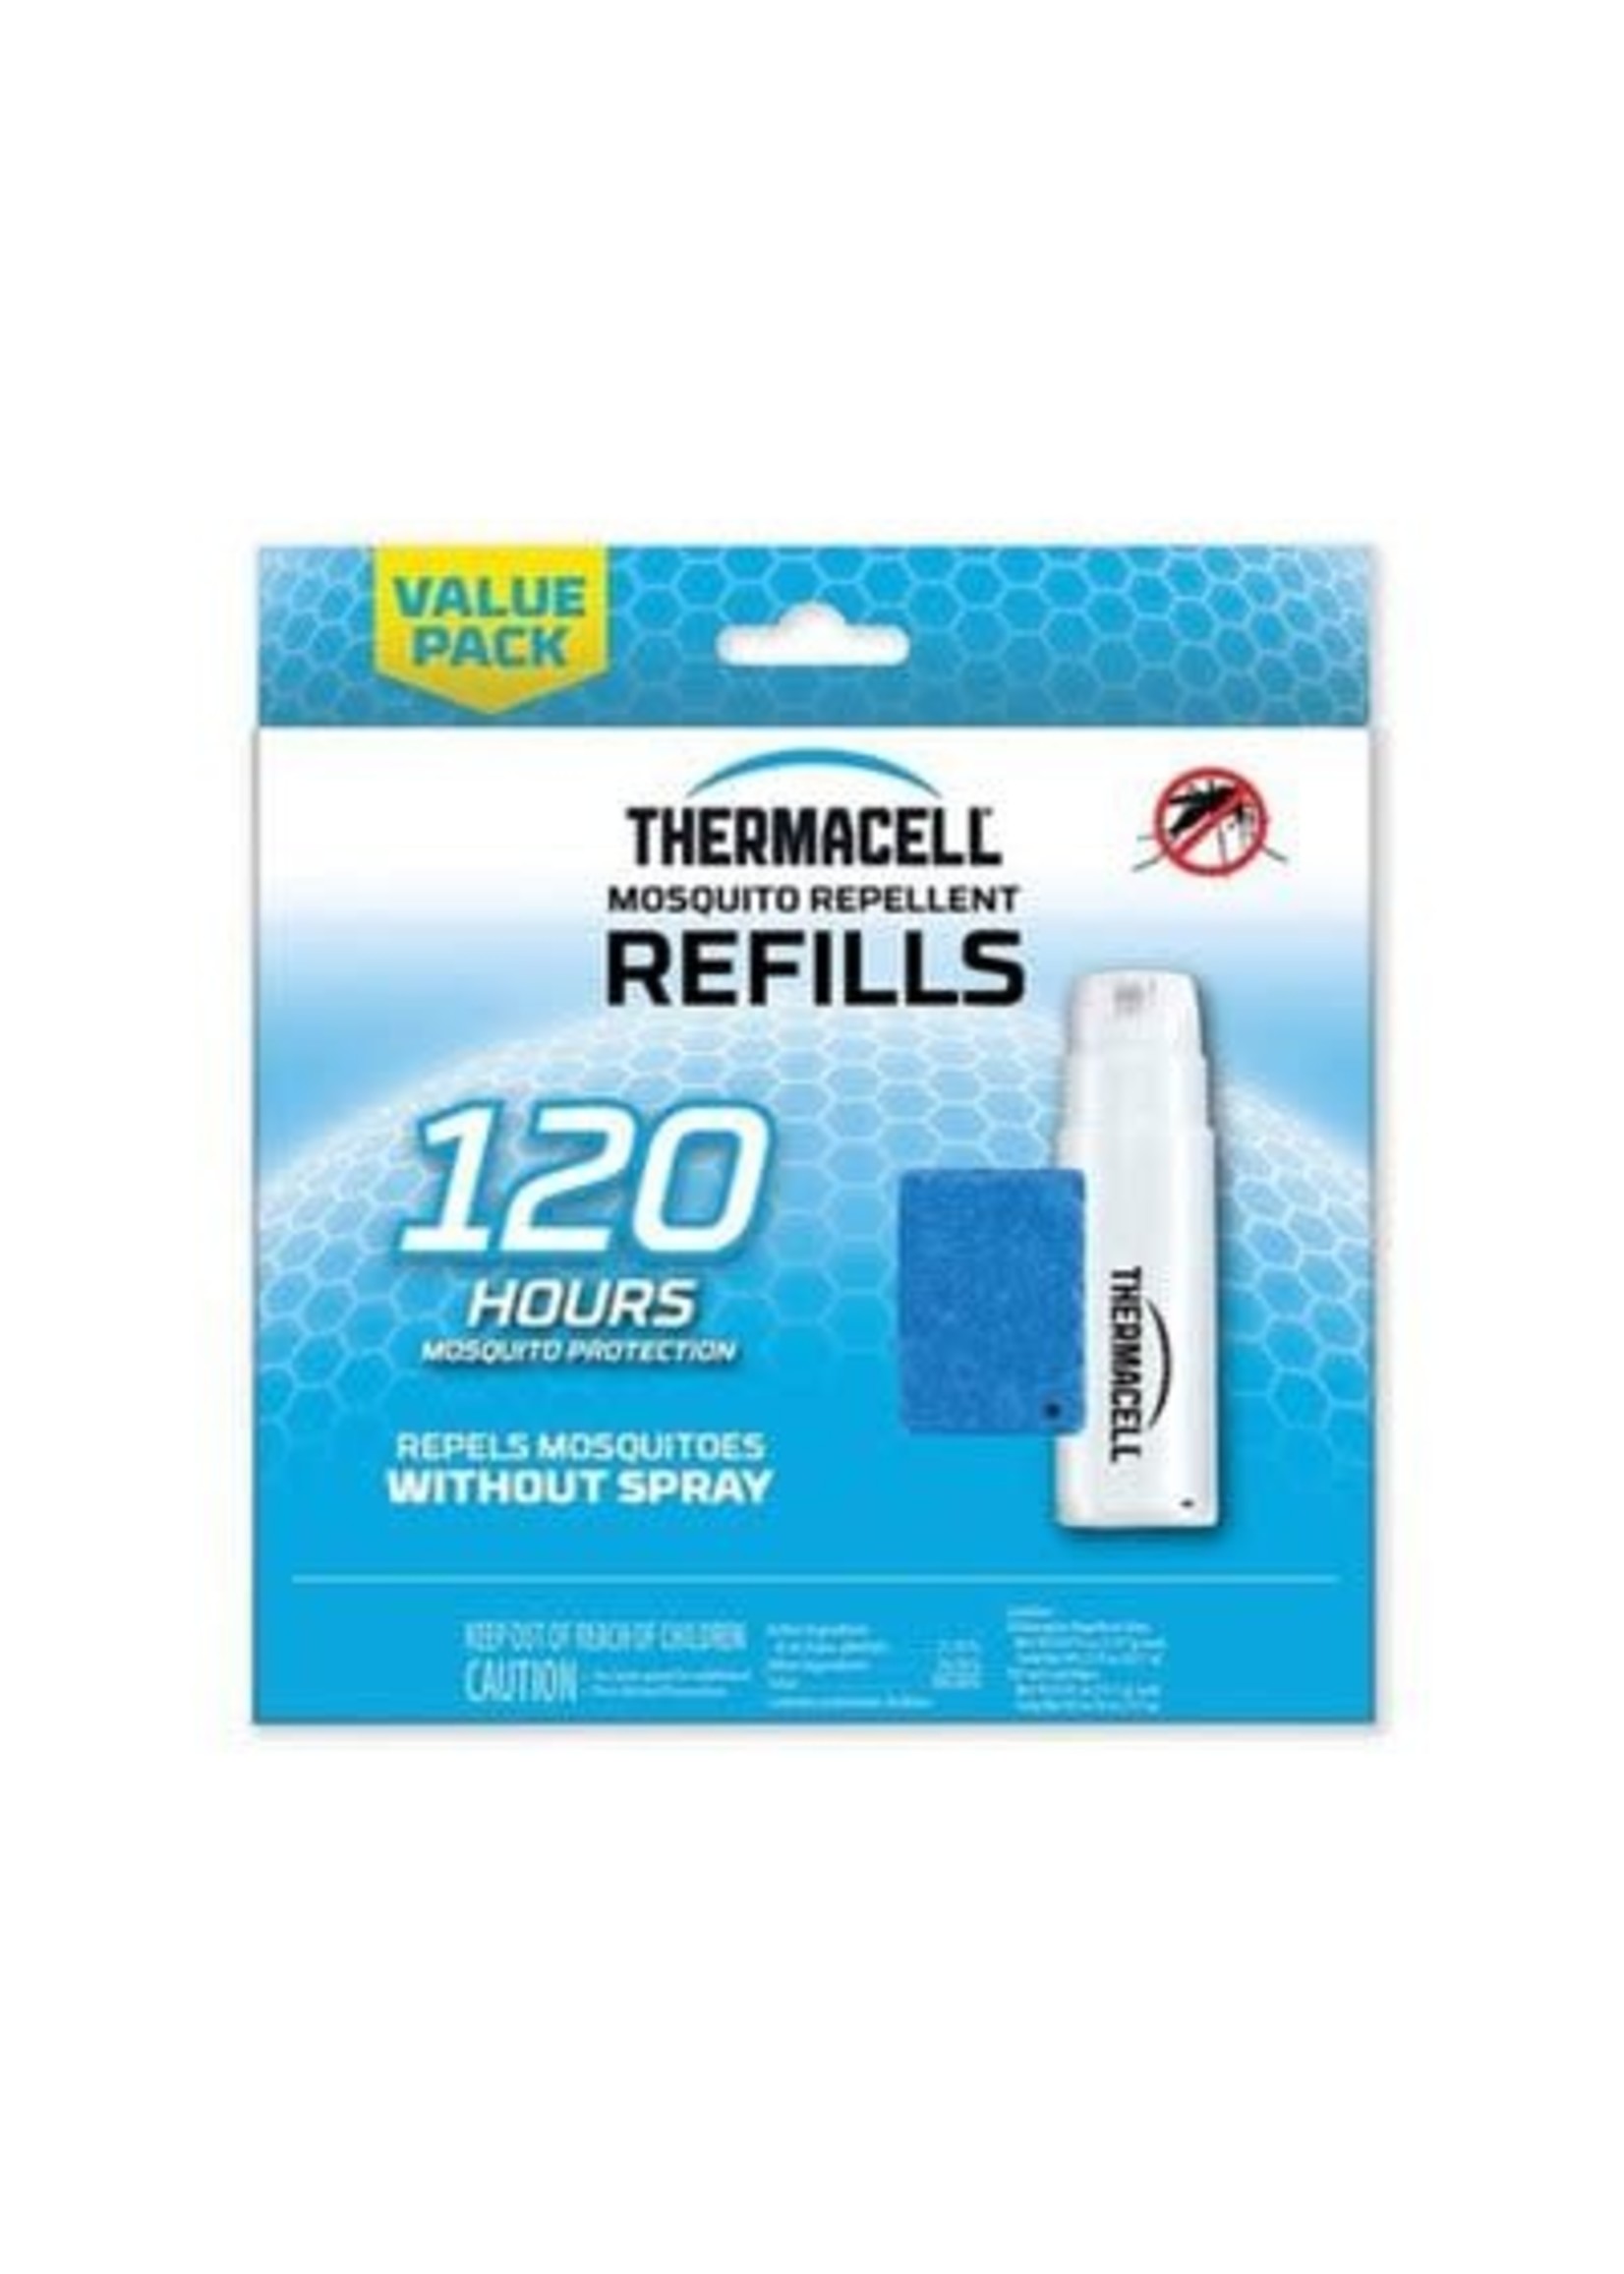 Thermacell Mosquito area repellent refills 120 hours